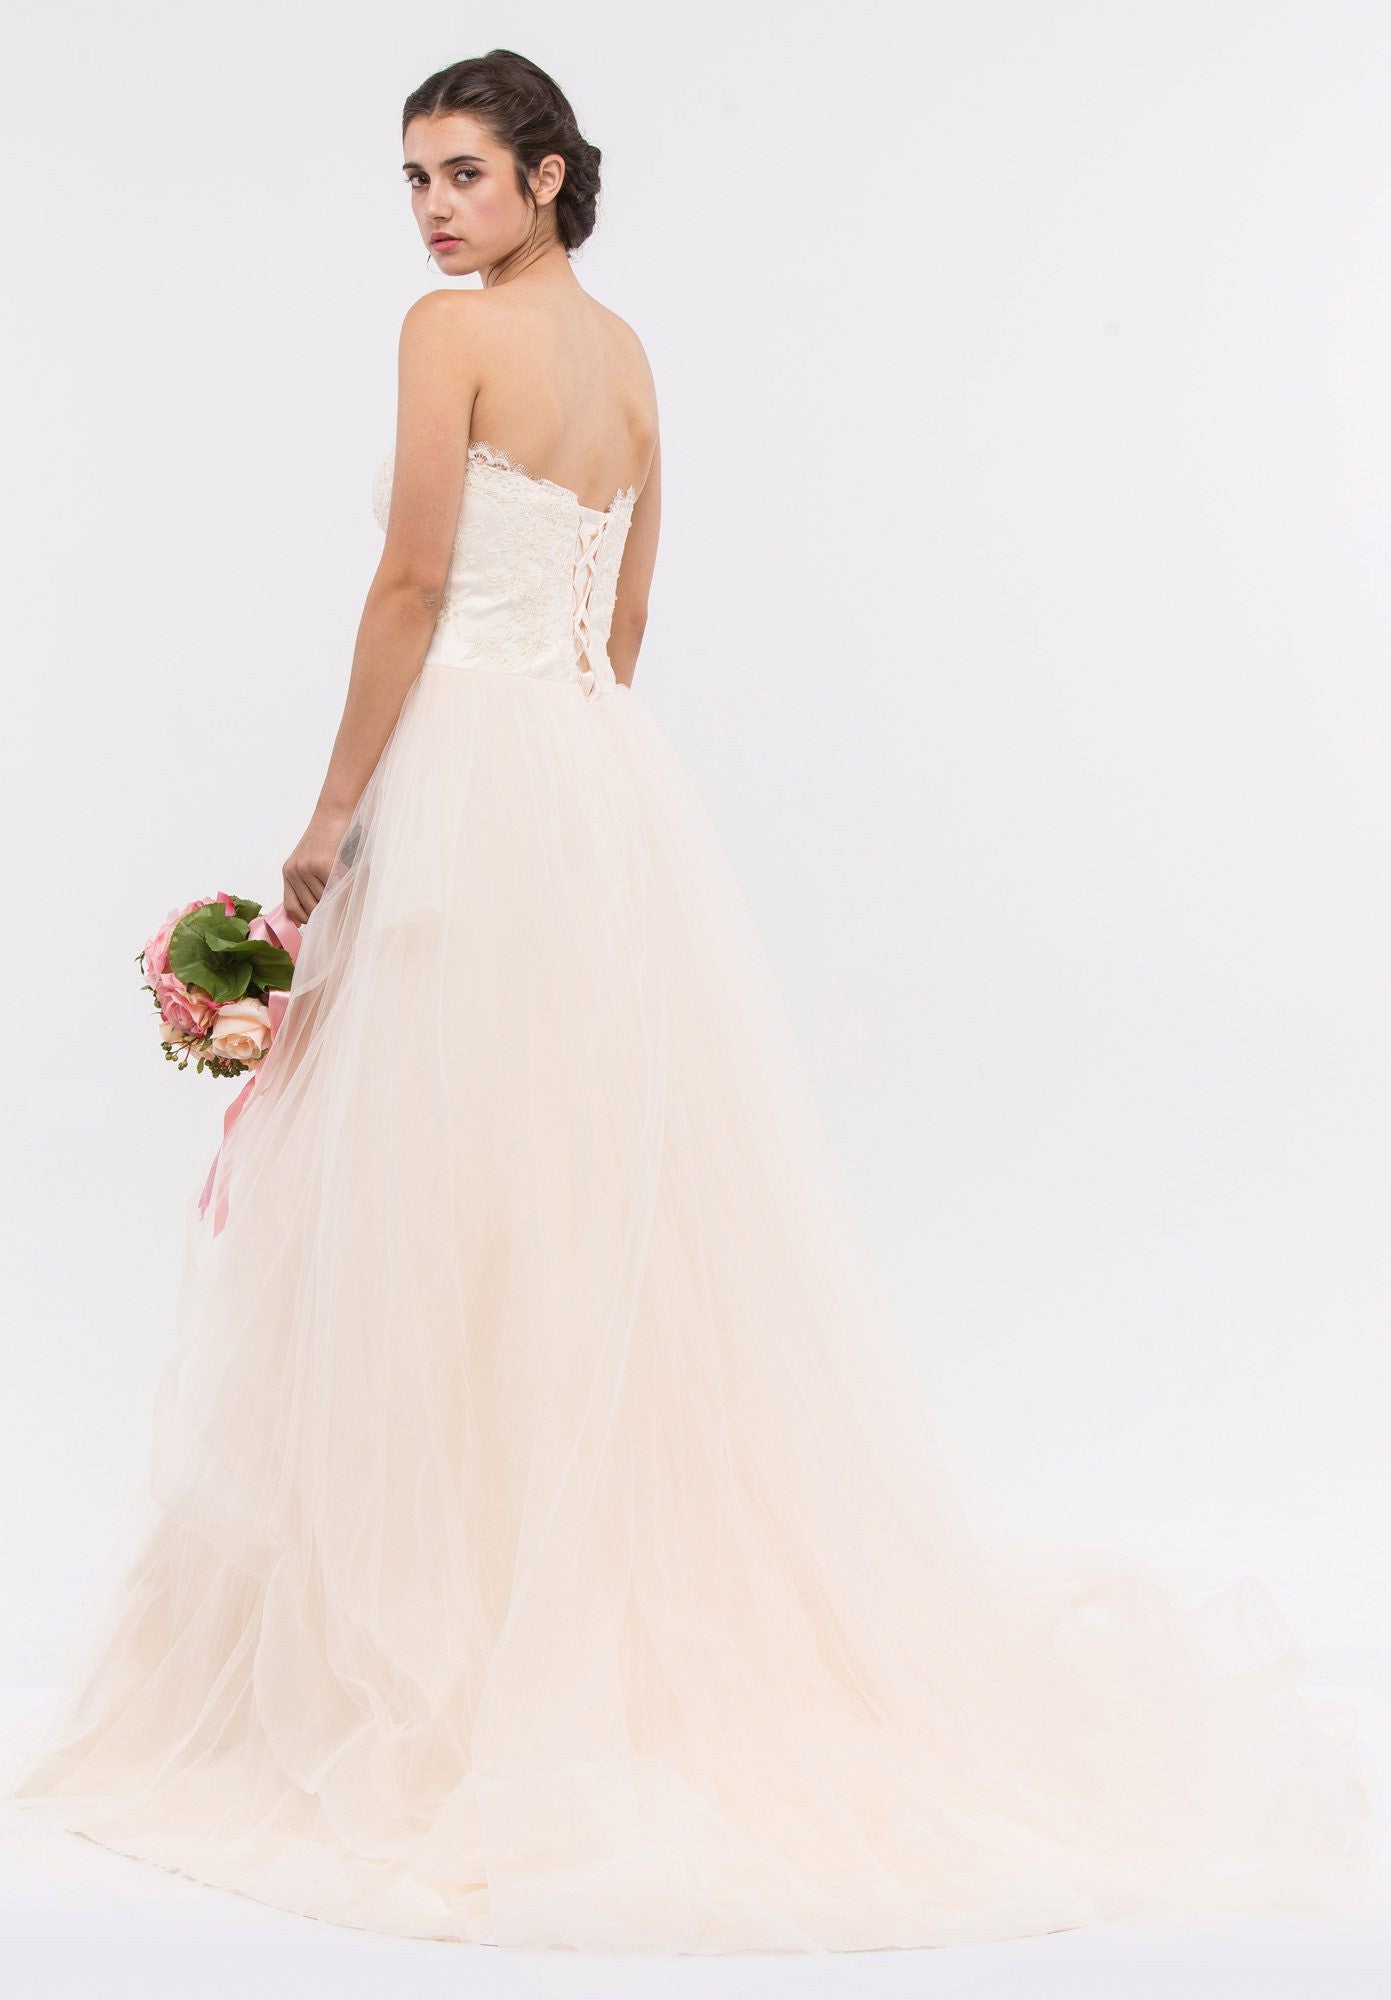 Strapless Sweetheart Neckline Embellished Wedding Gown Champagne